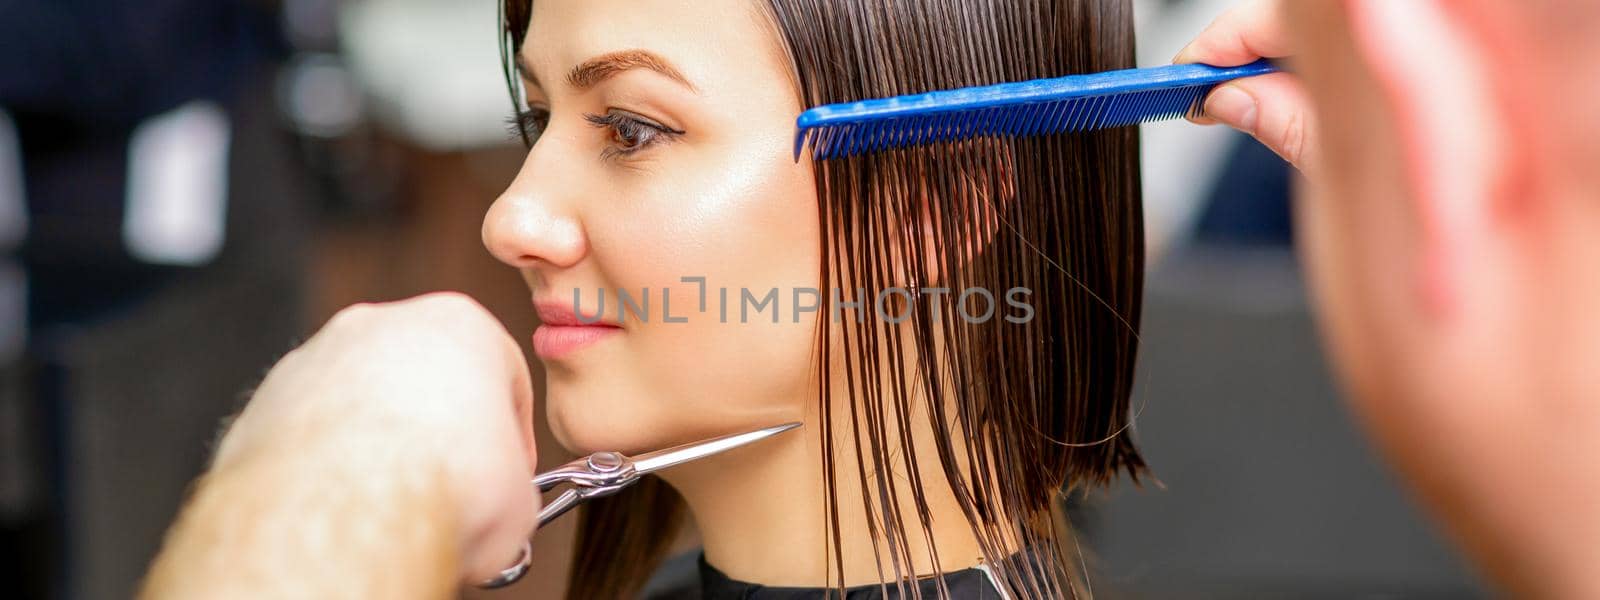 Male hairdresser cuts wet hair of young caucasian woman combing with a comb in a hair salon